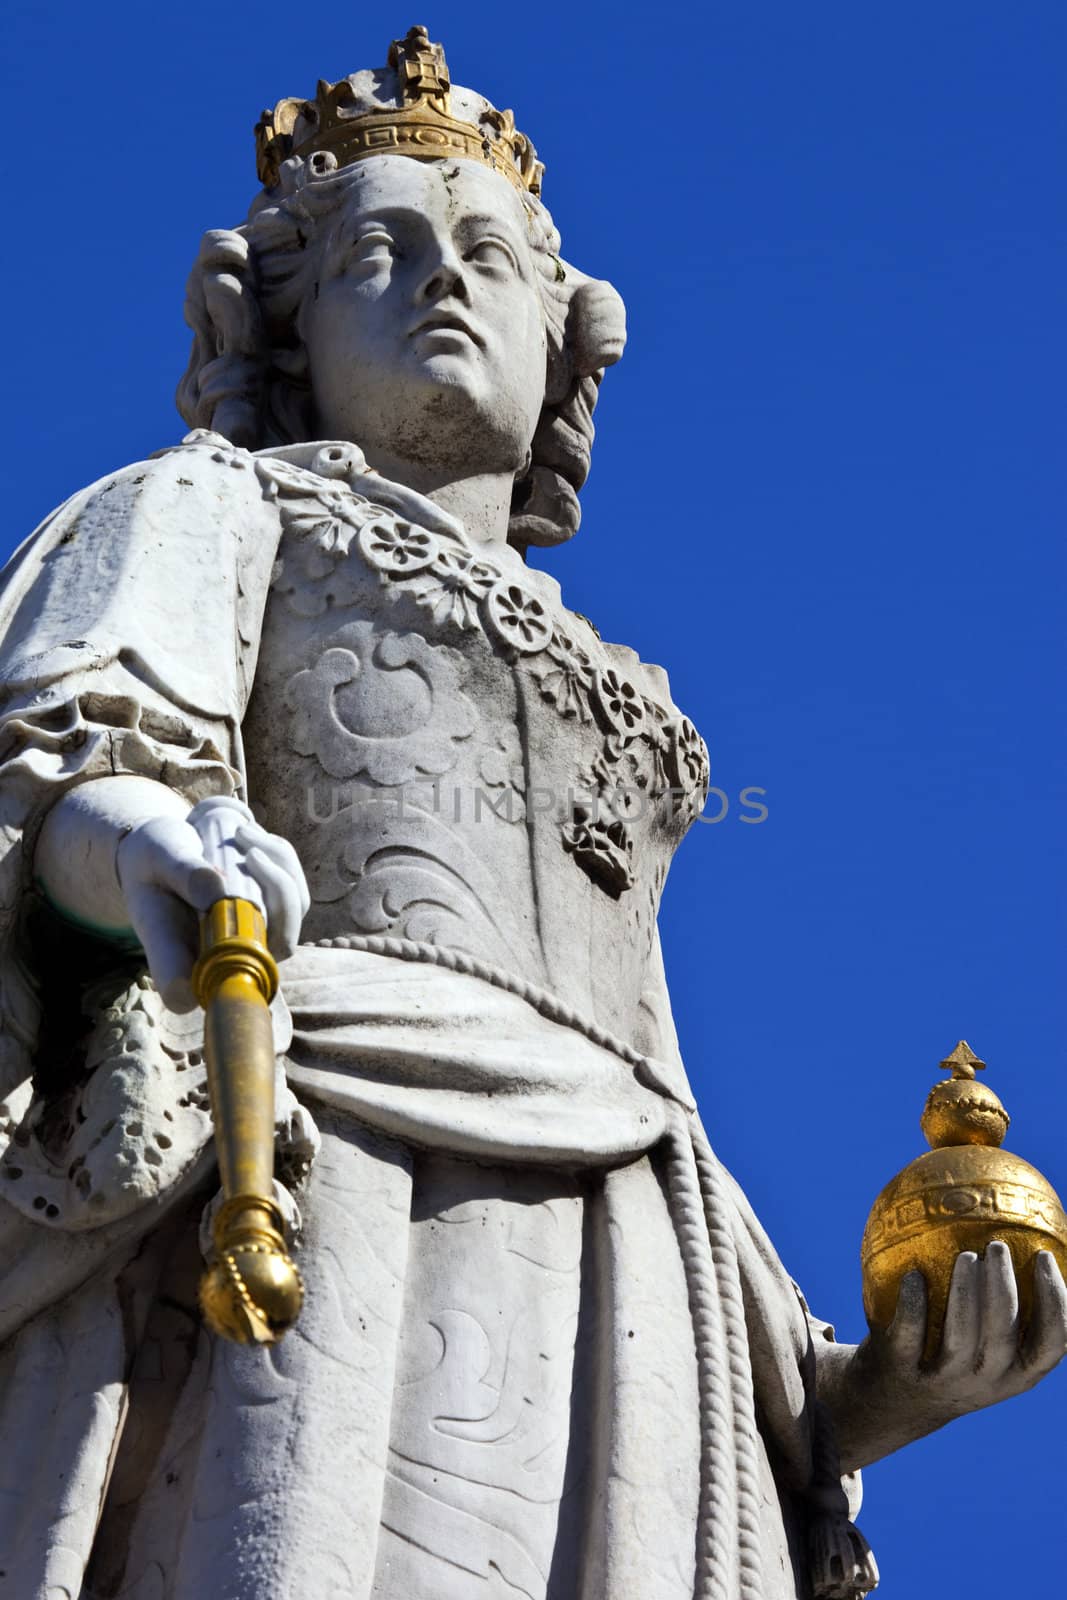 Statue of Queen Anne, situated outside St. Paul's Cathedral in London.